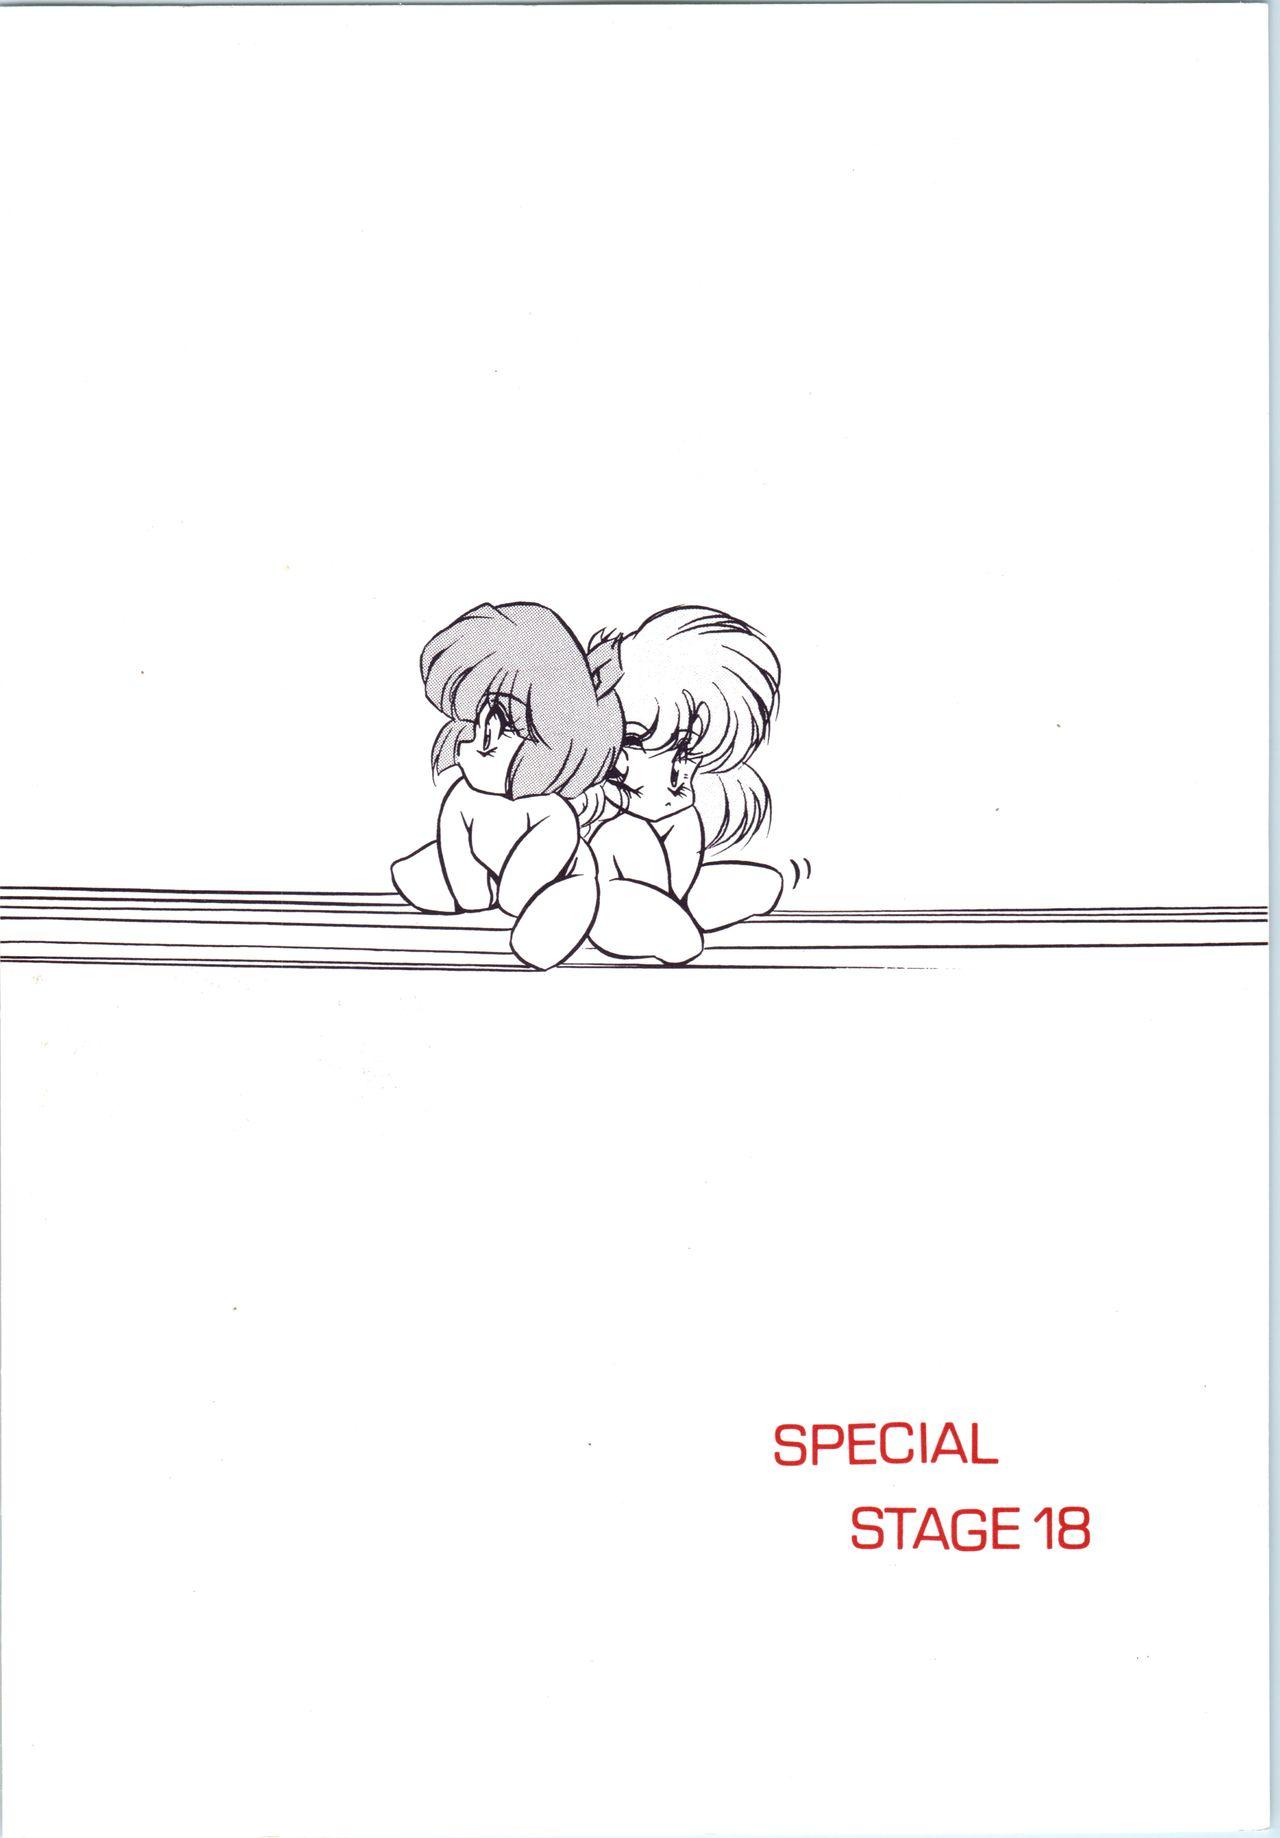 Realamateur C-COMPANY SPECIAL STAGE 18 - Ranma 12 Idol project Hard Cock - Page 58